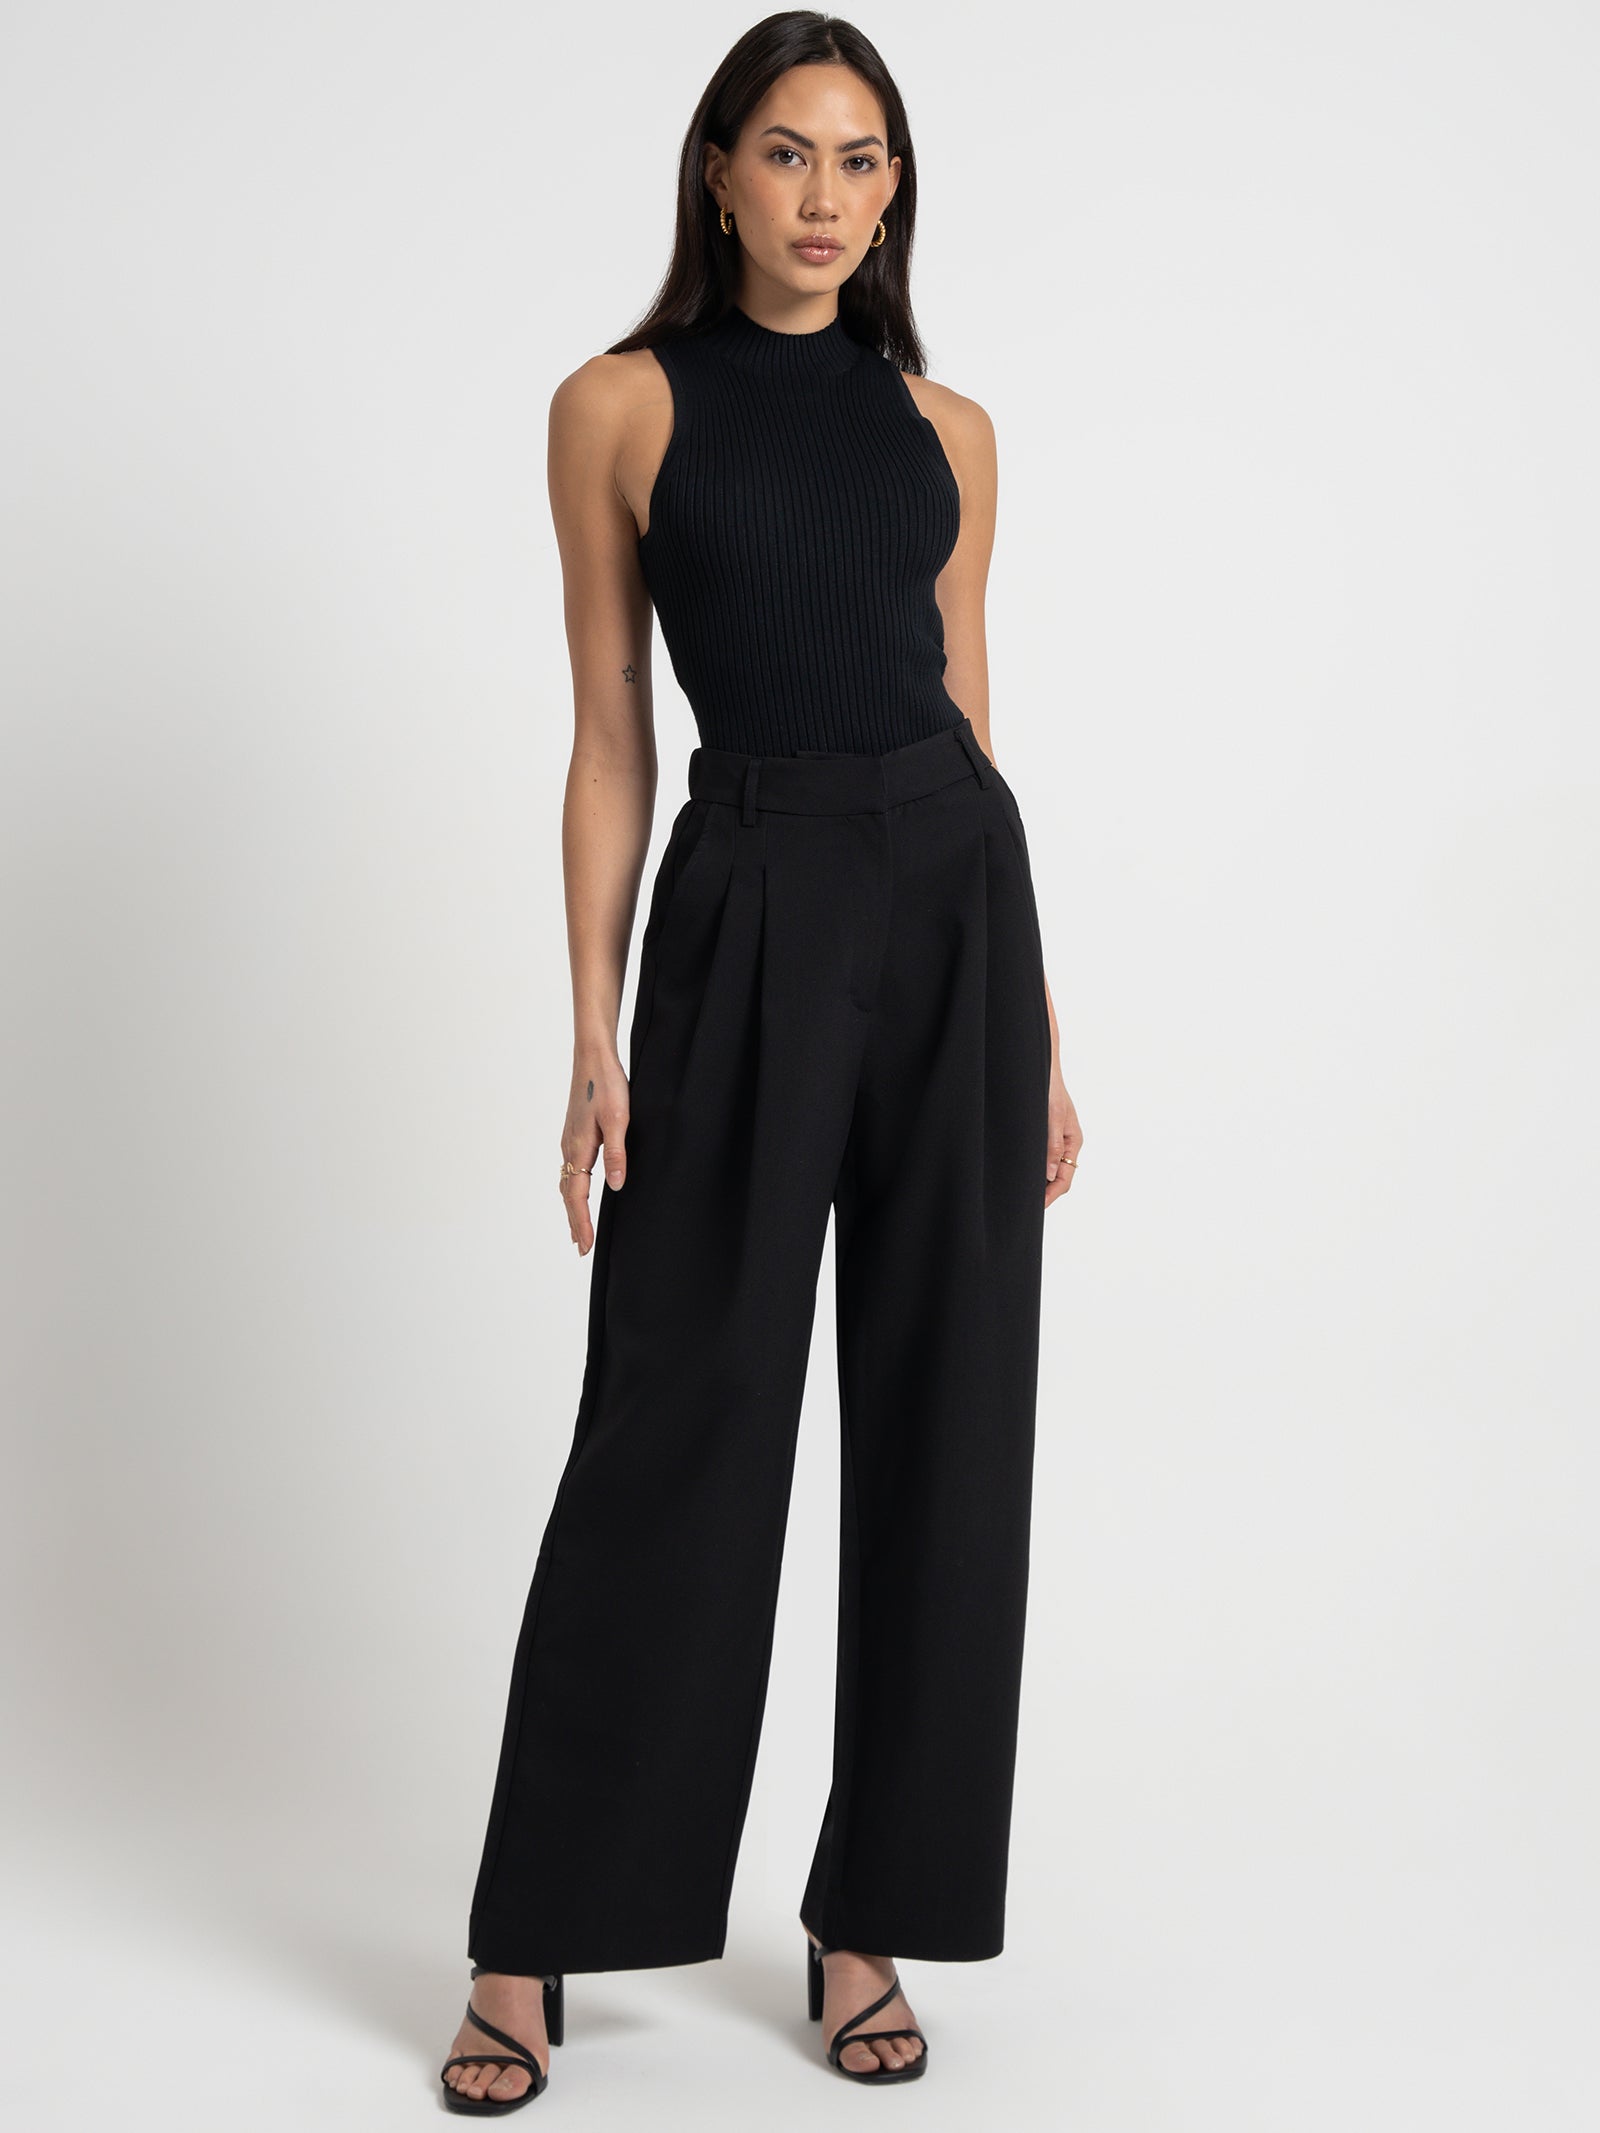 Manon Tailored Pant in Black - Glue Store